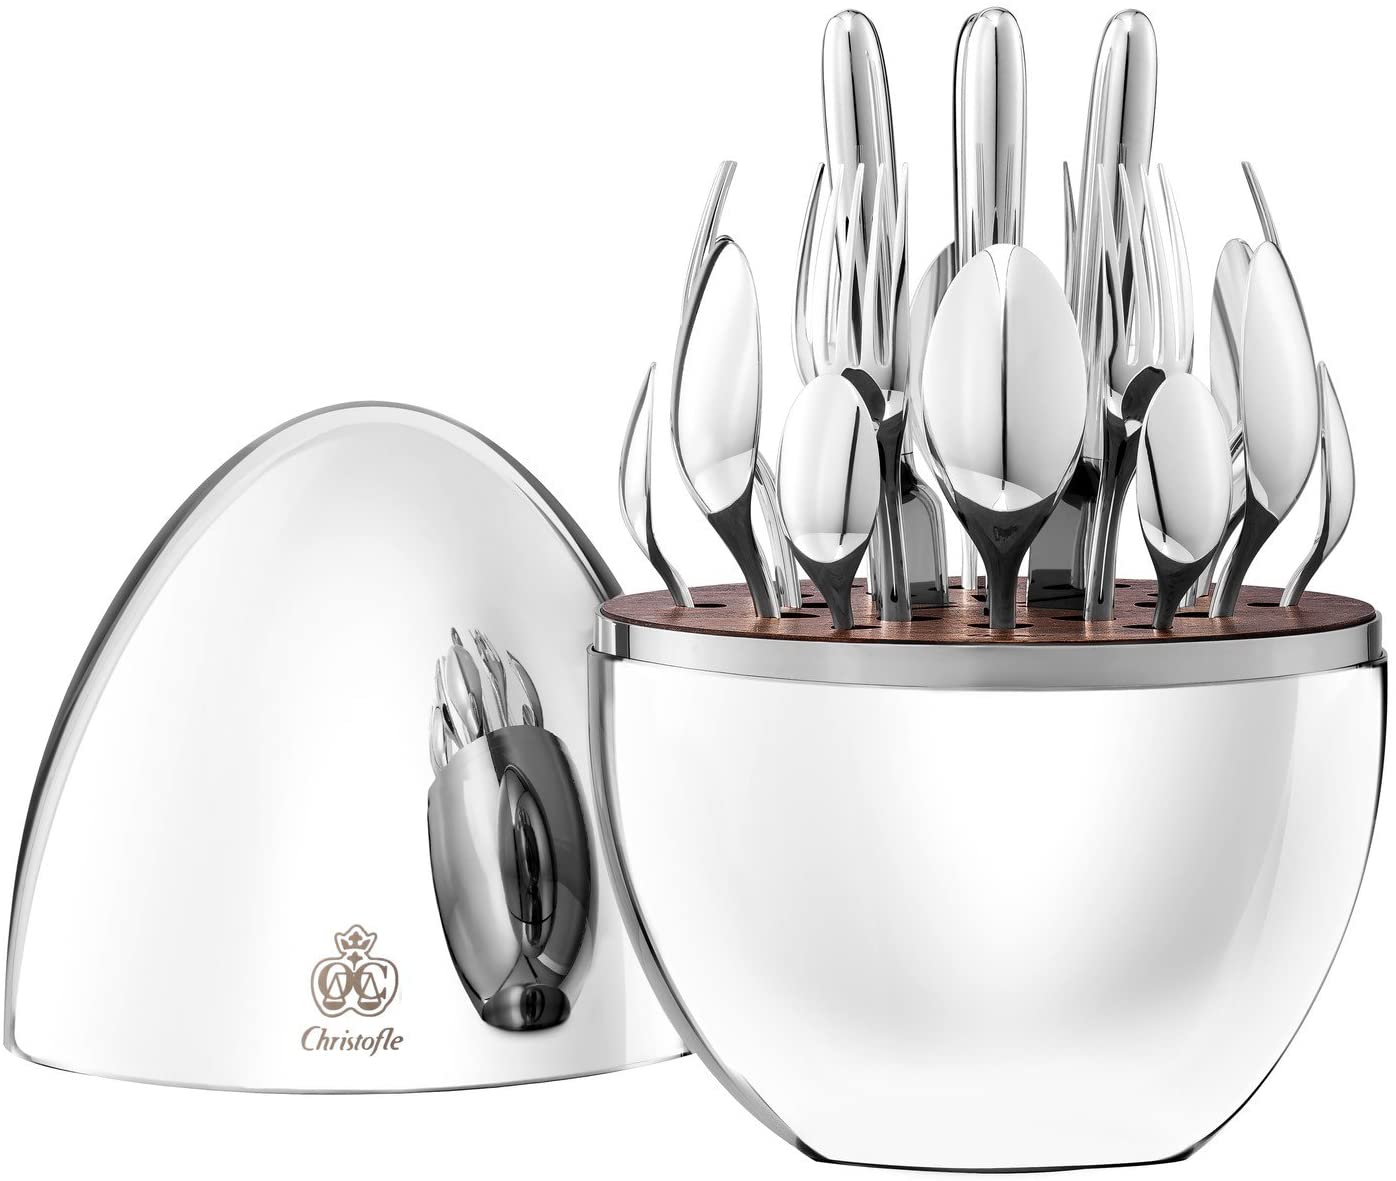 Christofle Mood 24-piece cutlery set with silver design container